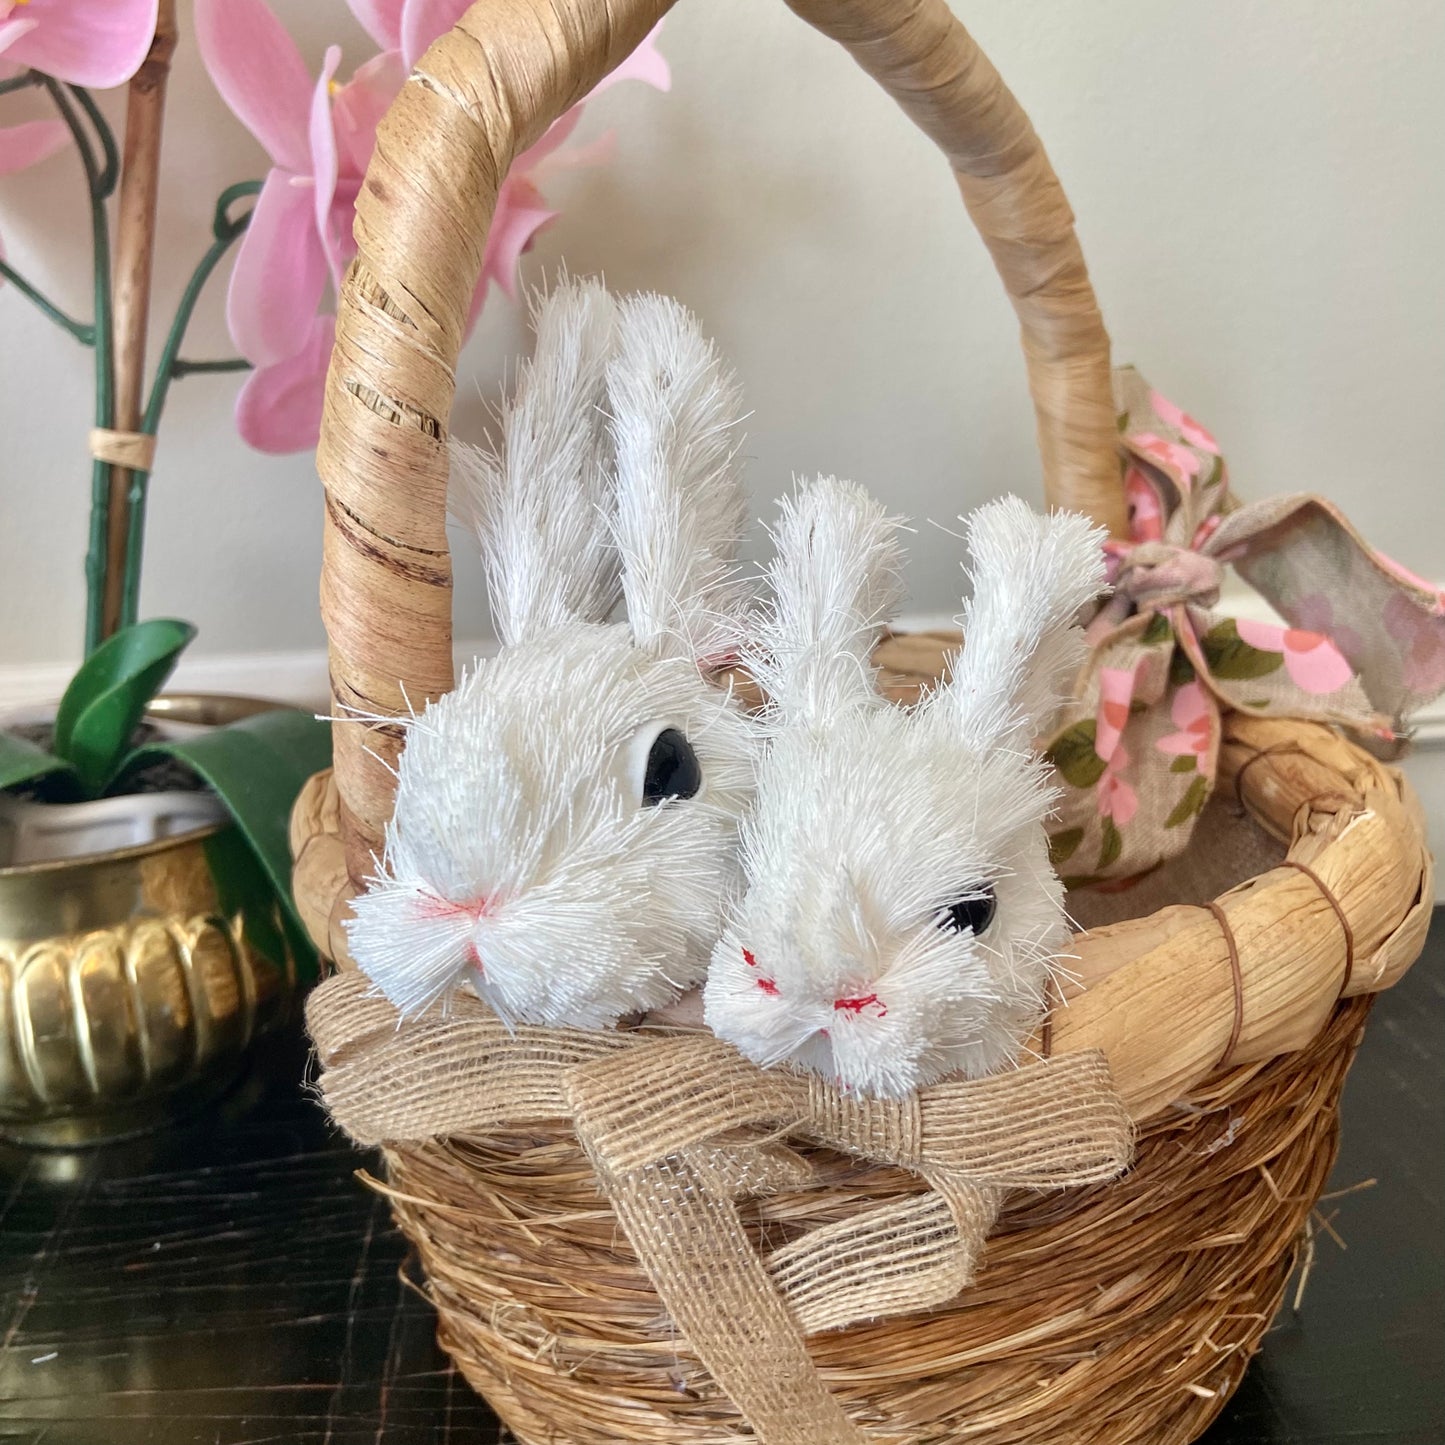 Set of 2 vintage rattan woven Easter baskets with bunny rabbits and bows.